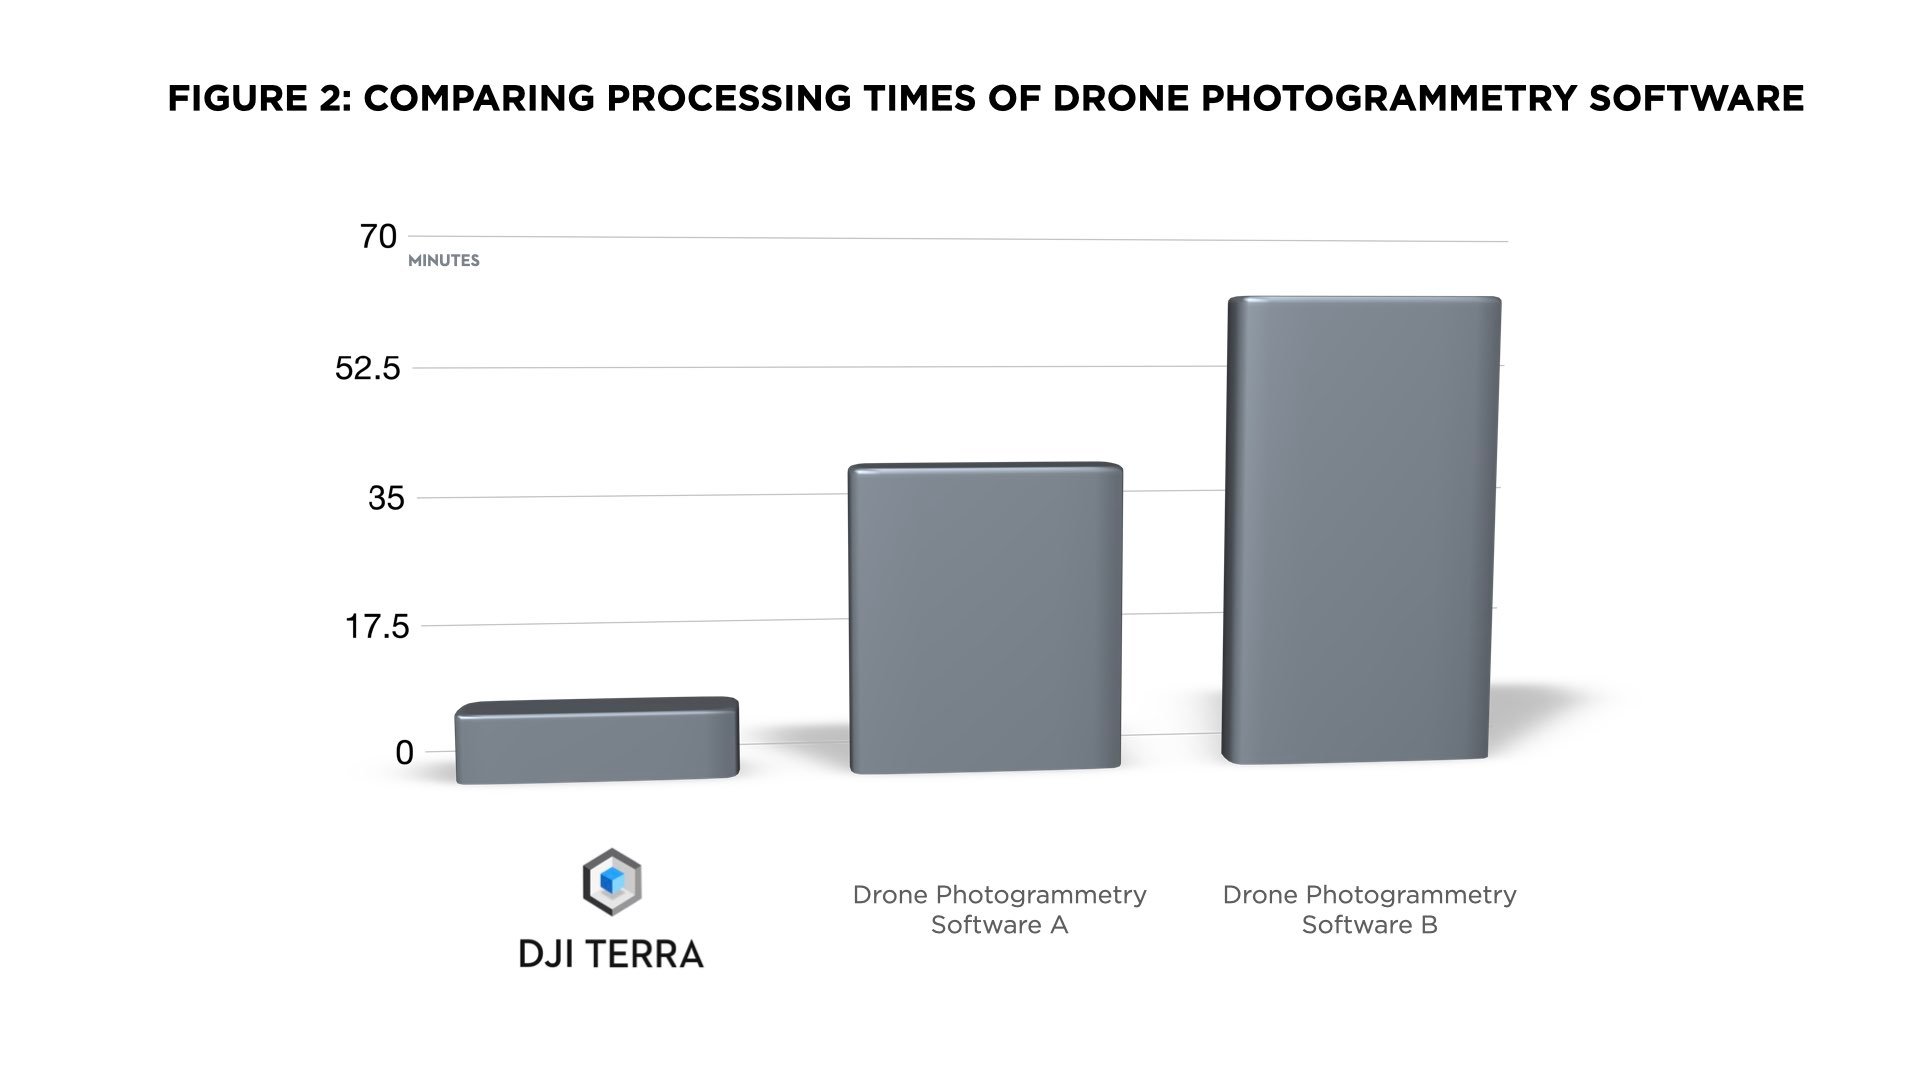 Comparing processing times of drone photogrammetry software